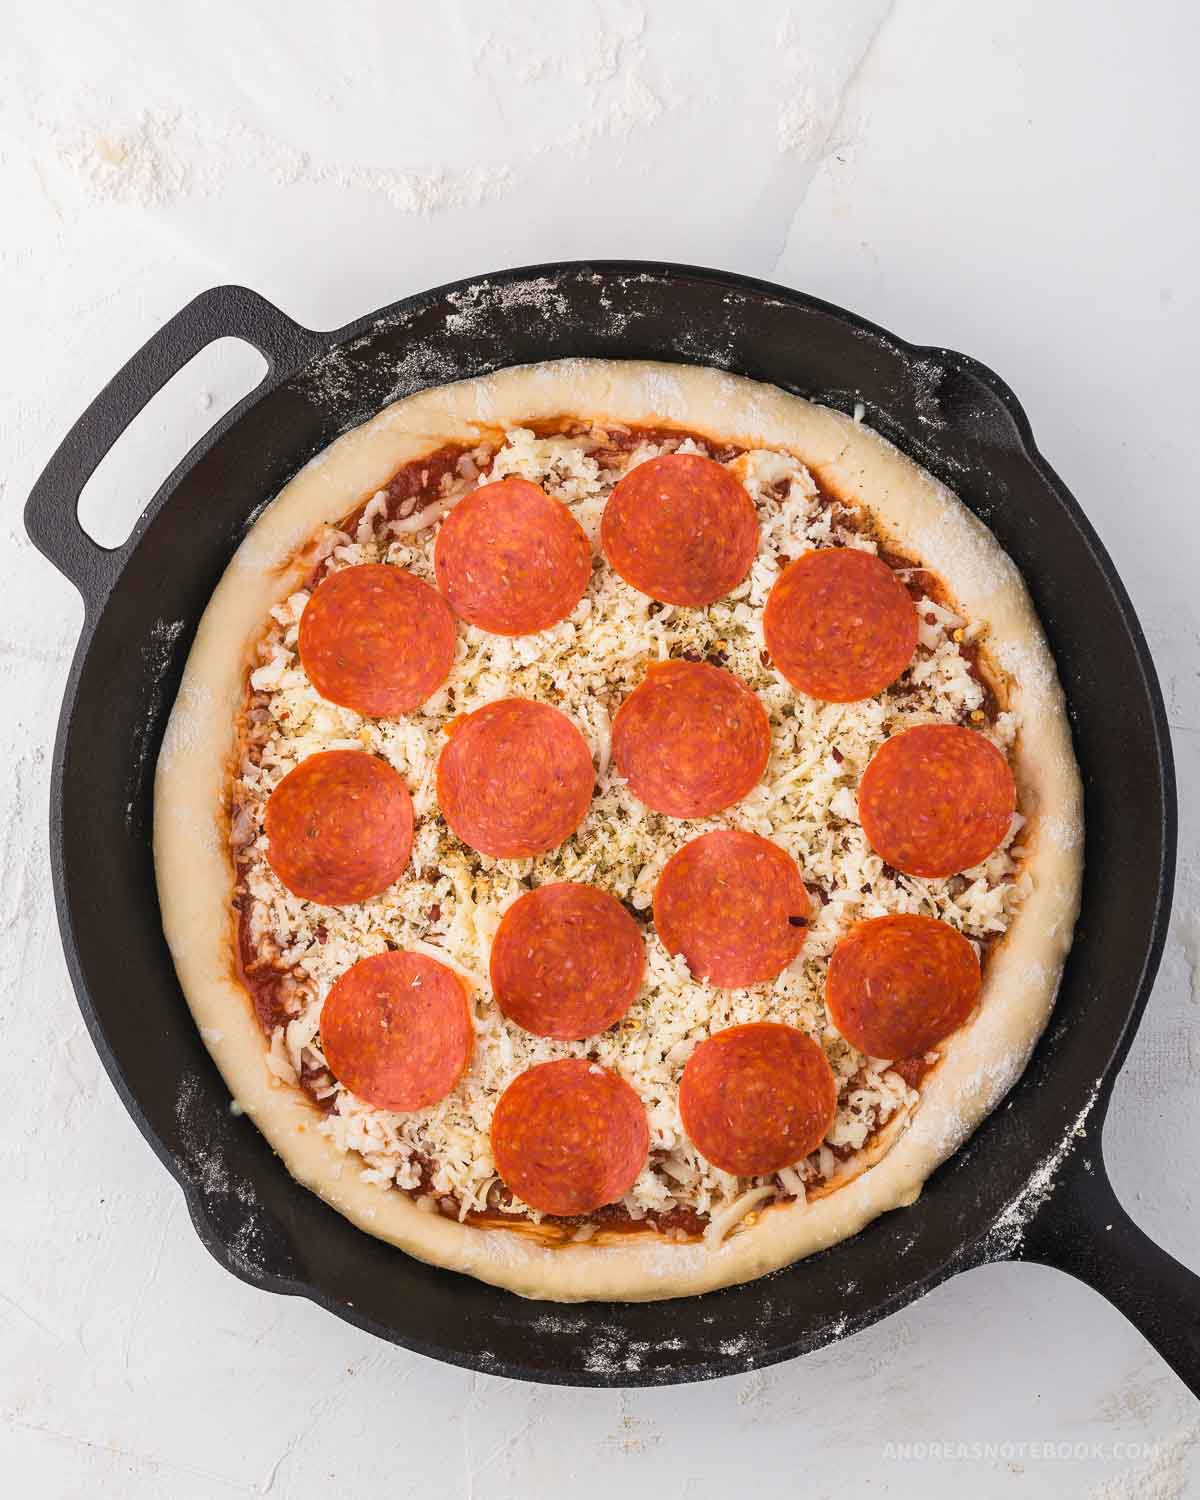 Pepperoni slices placed over cheese on pizza.